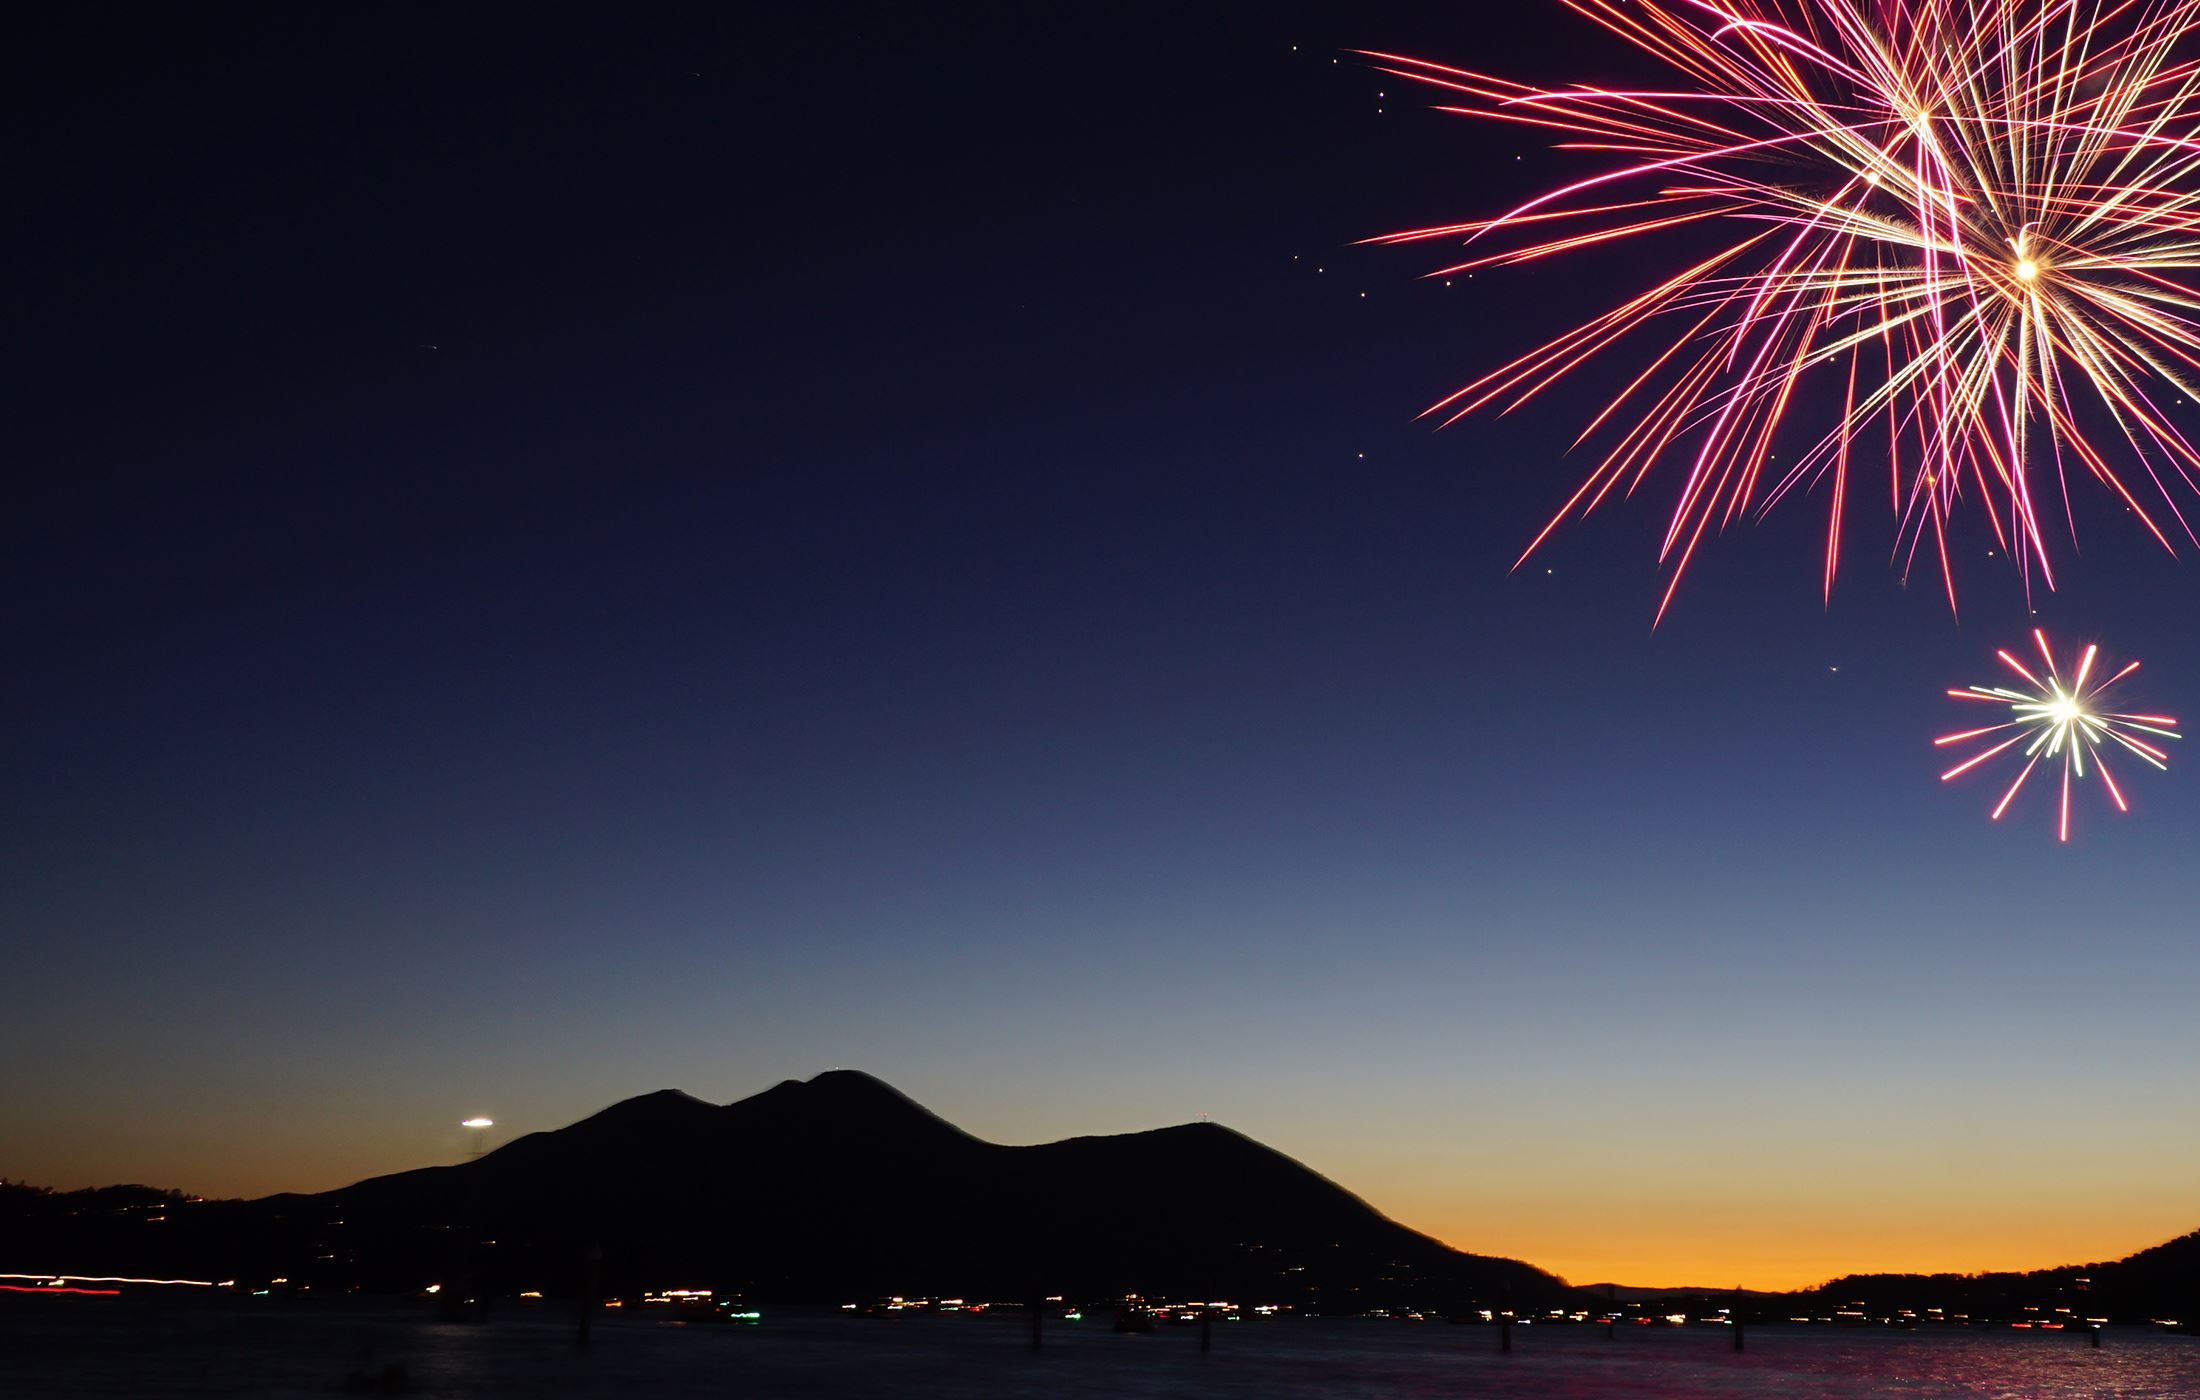 Clear Lake Fireworks dazzle on the Fourth of July